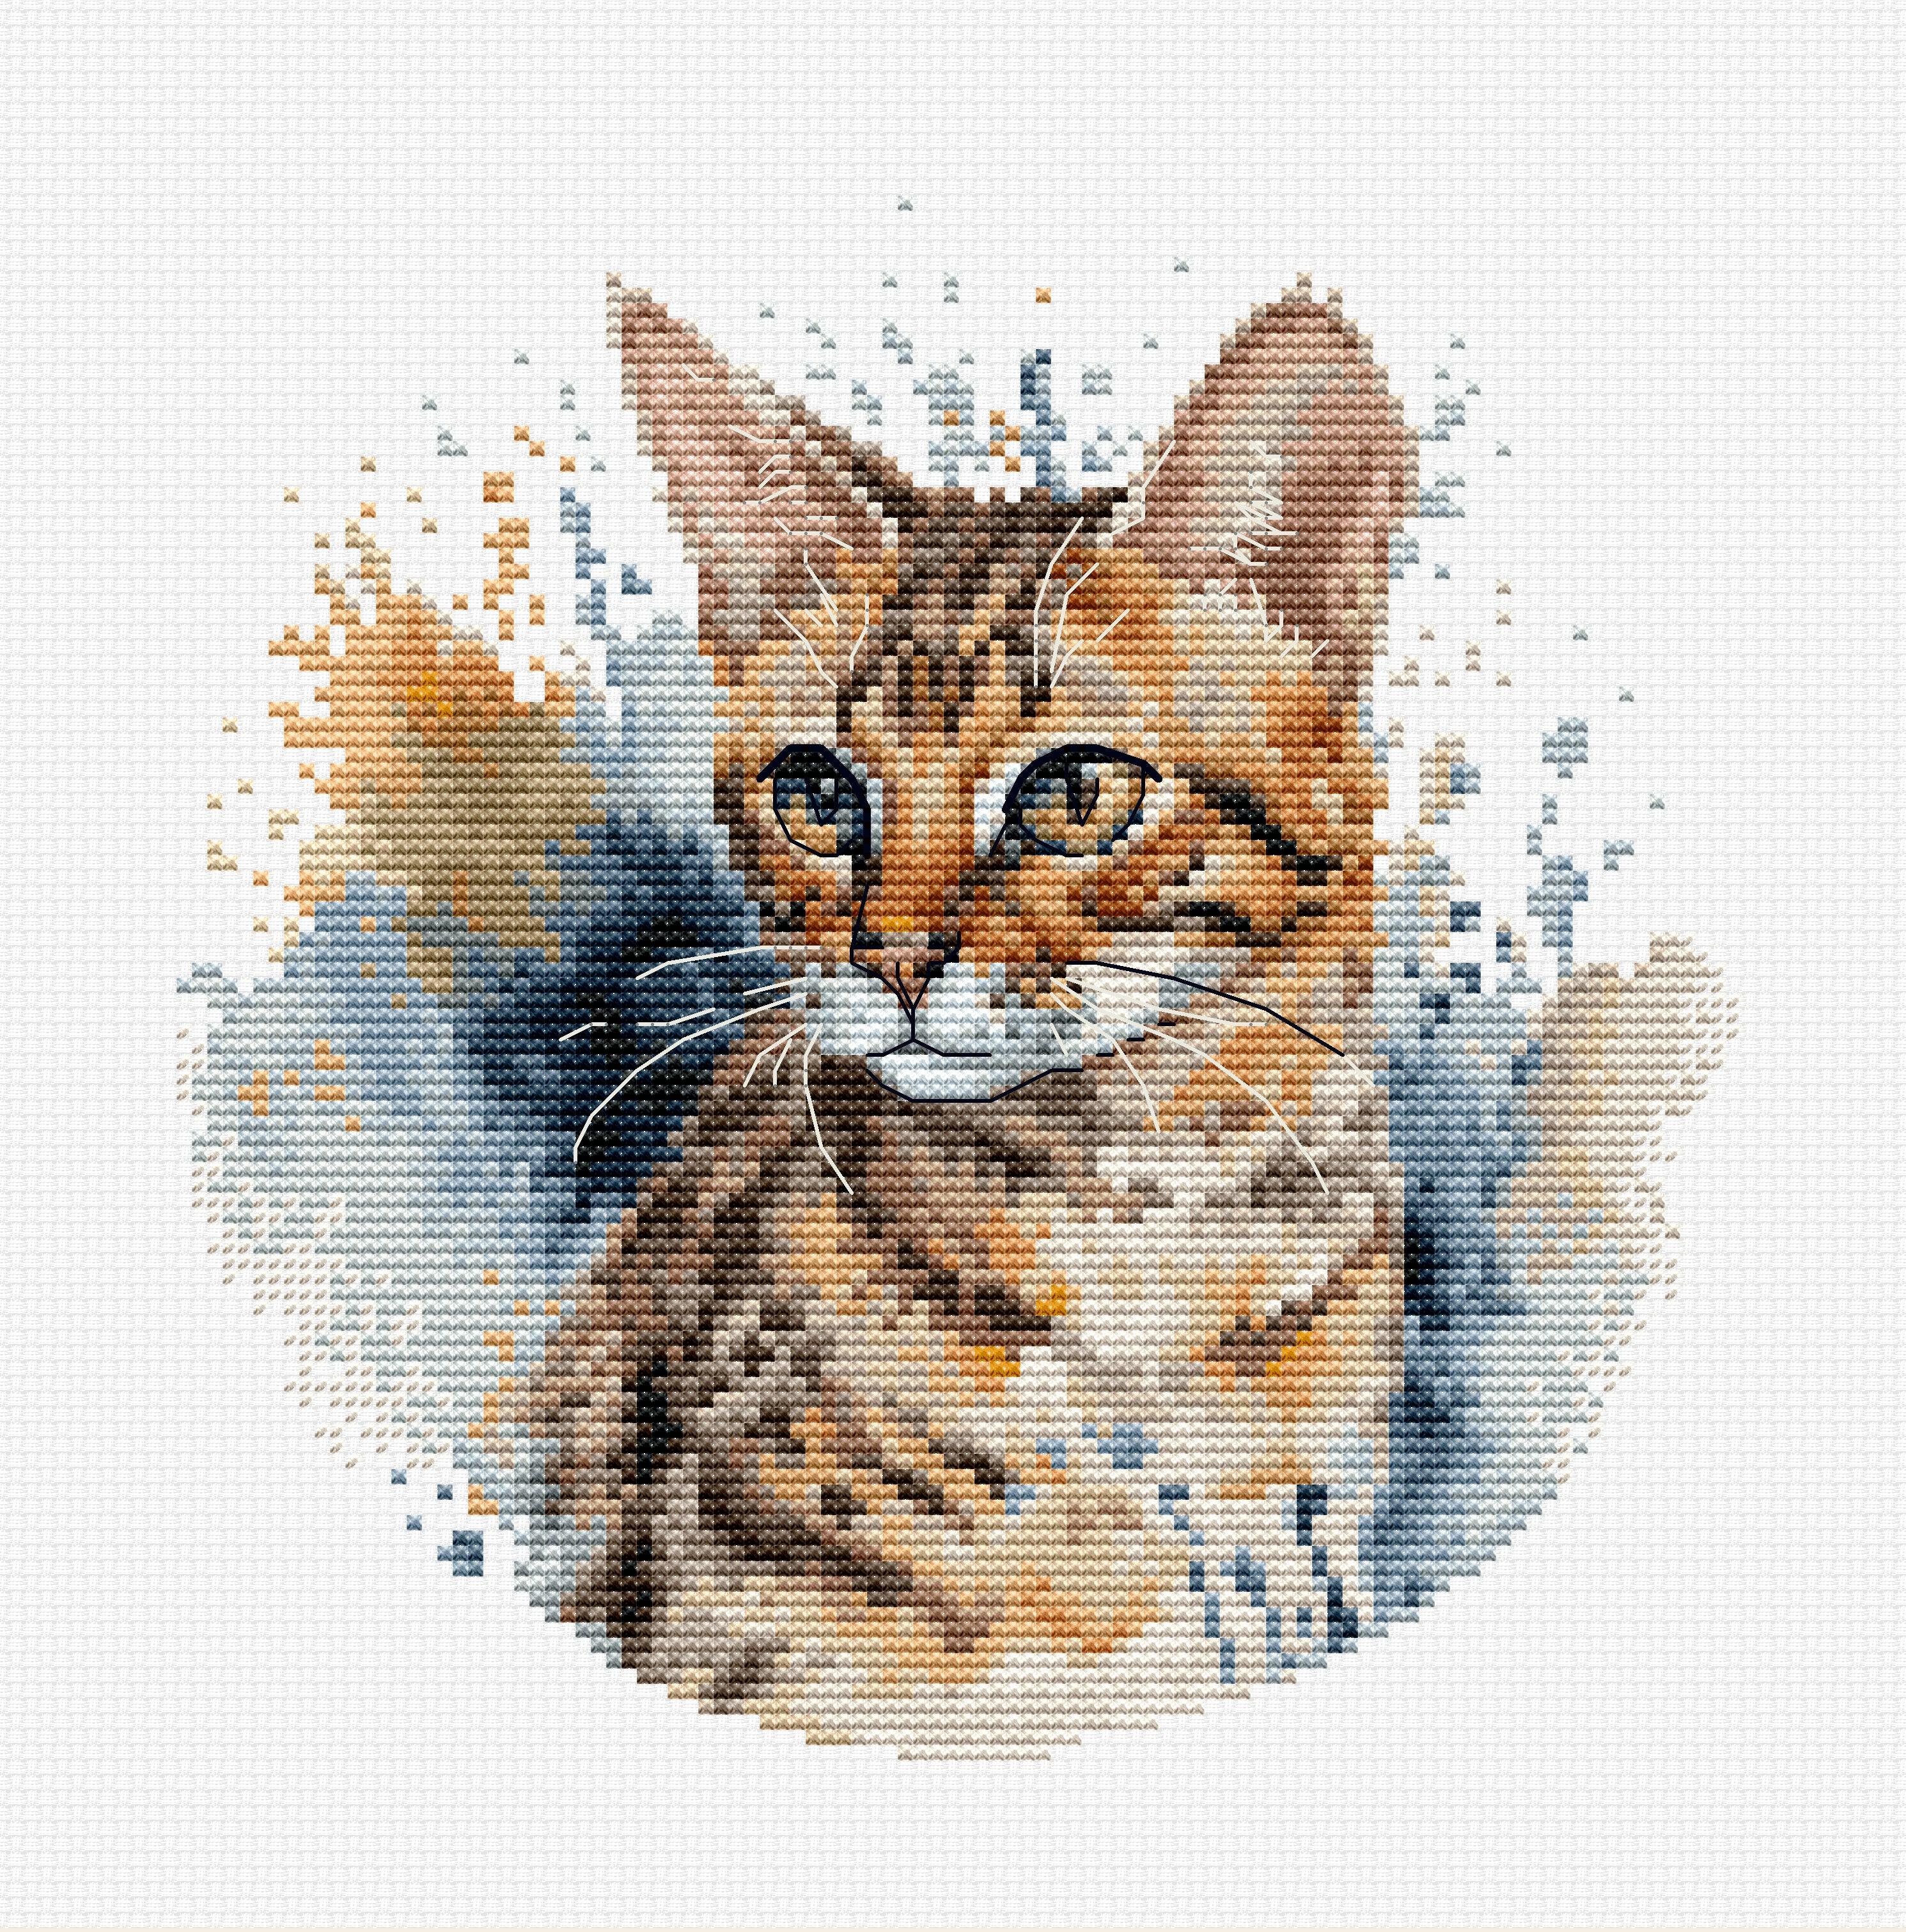 Cross Stitch Kit with Hoop Included Luca-S - BC210, The Bengal Cat - Luca-S Cross Stitch Kits